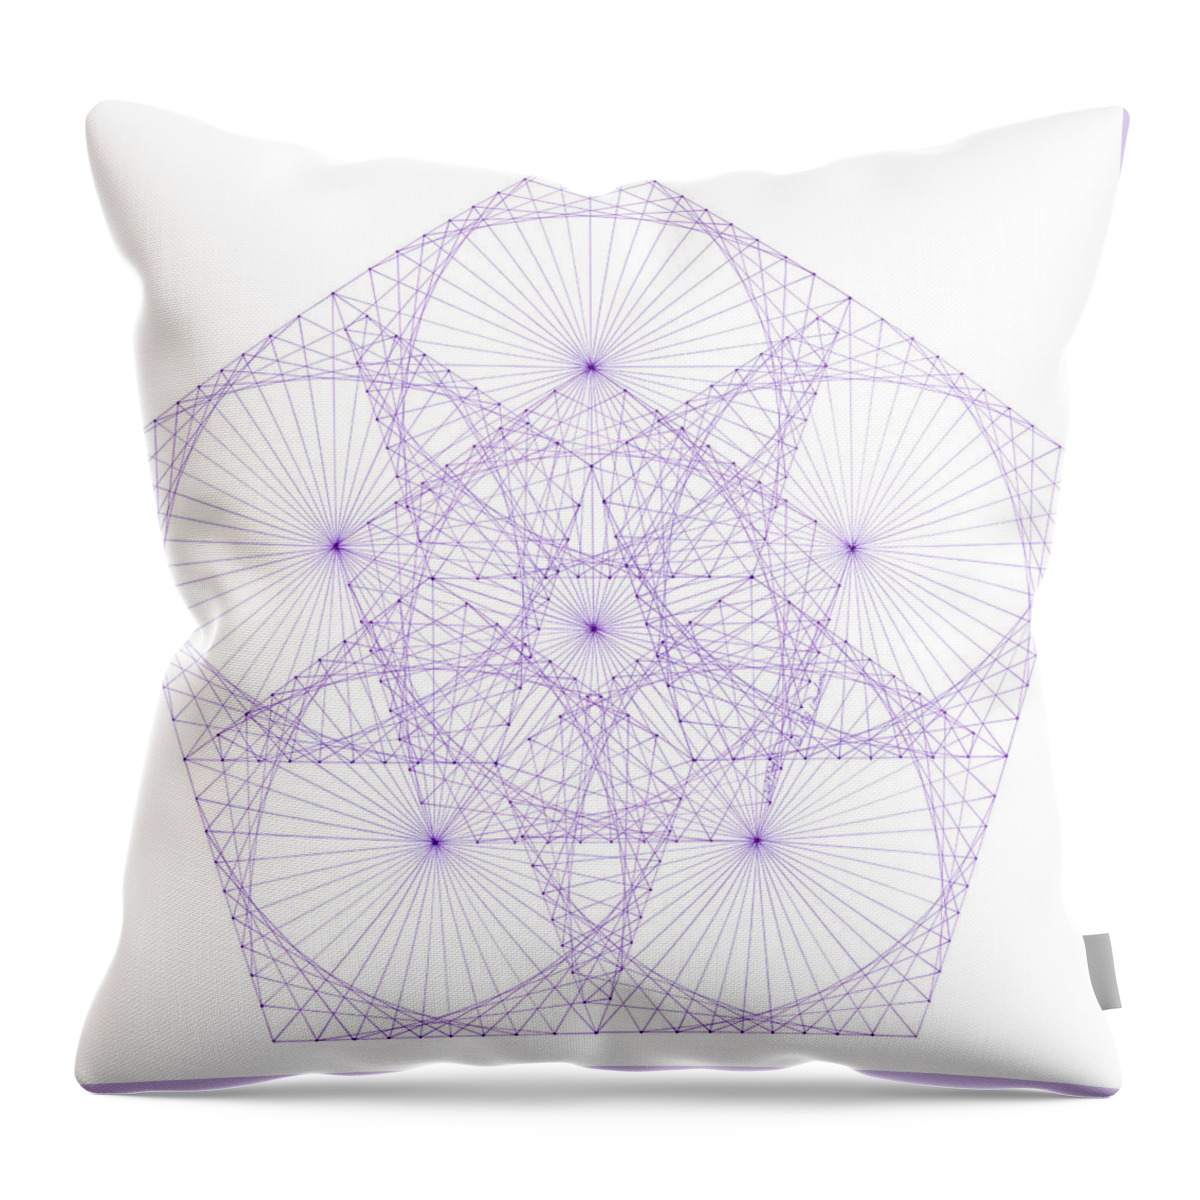 Geometry Throw Pillow featuring the drawing Pentangle by Bev Donohoe